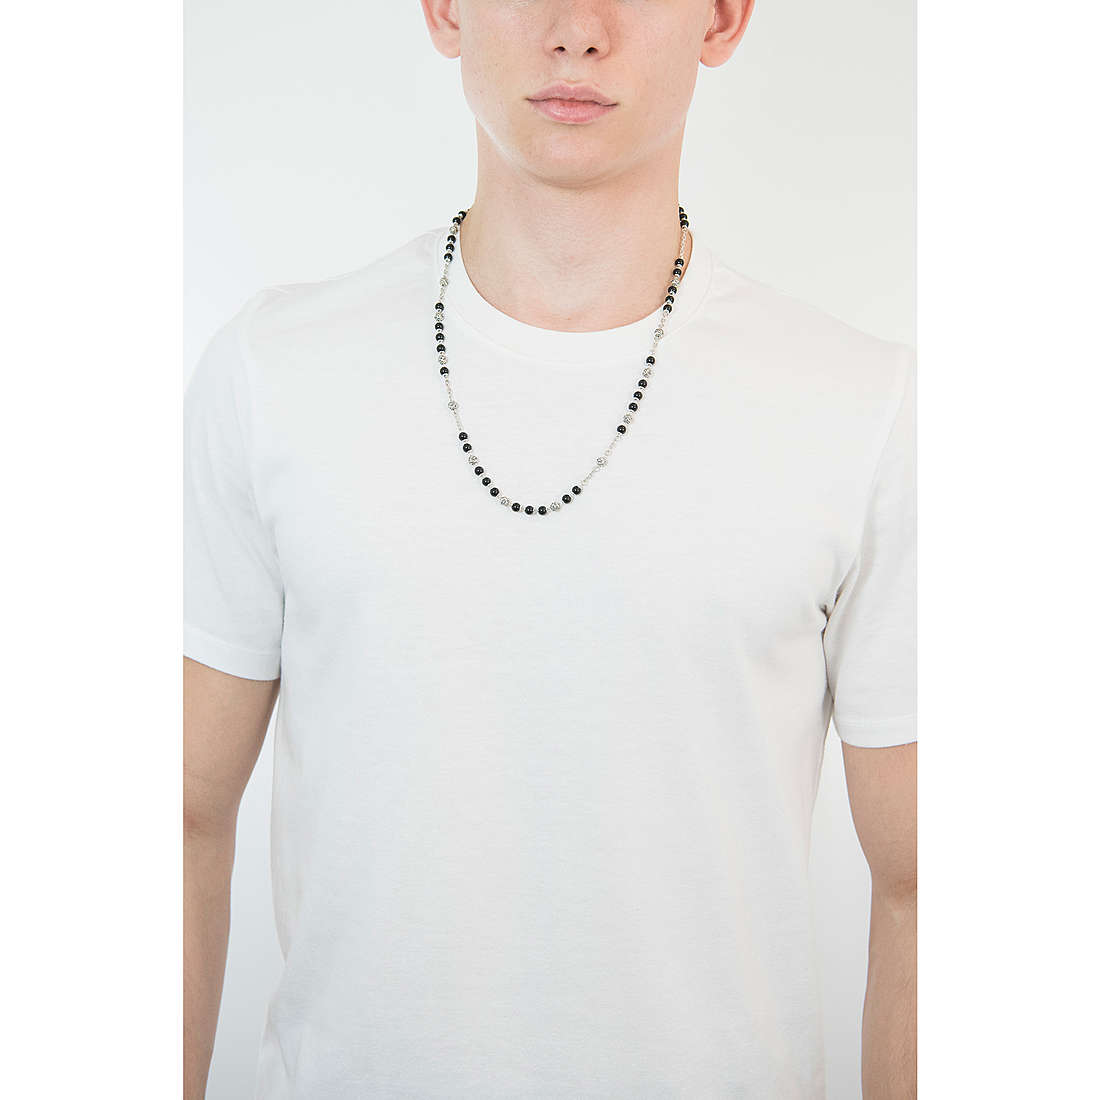 Cesare Paciotti necklaces Black Thinking man JPCL1425B wearing